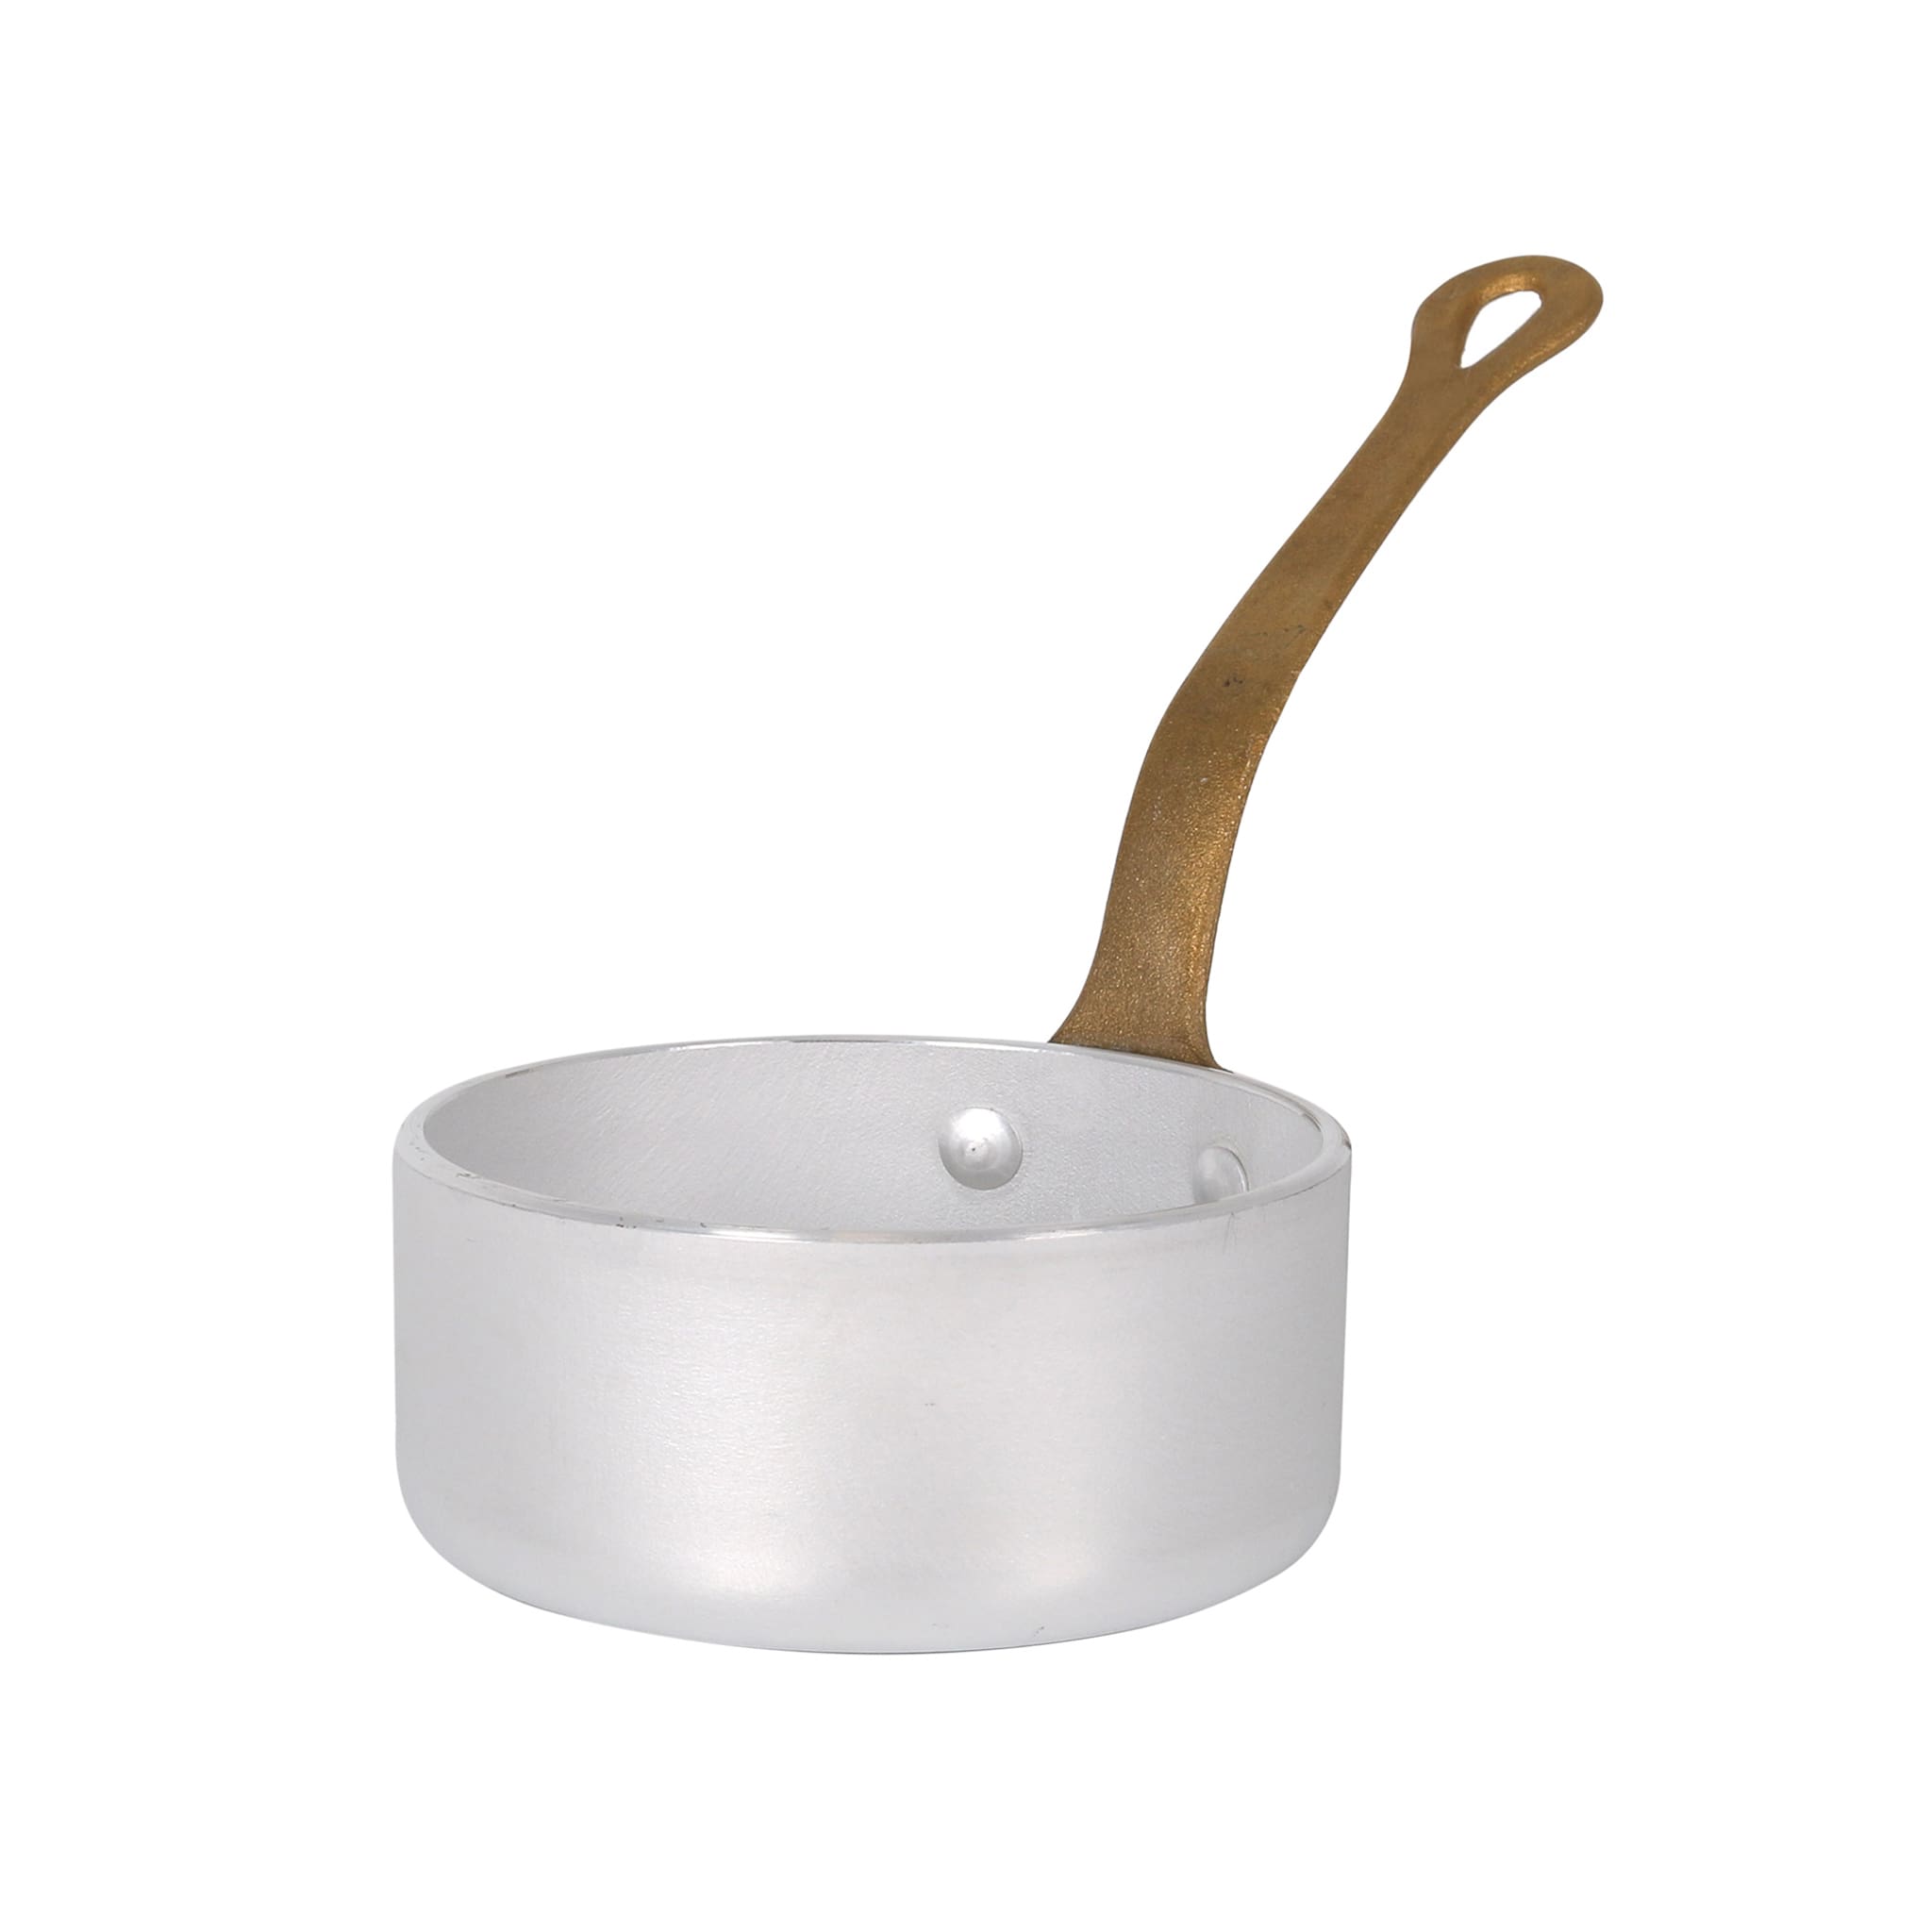 Mini Saucepan with Brass Handles for Serving, 11cm